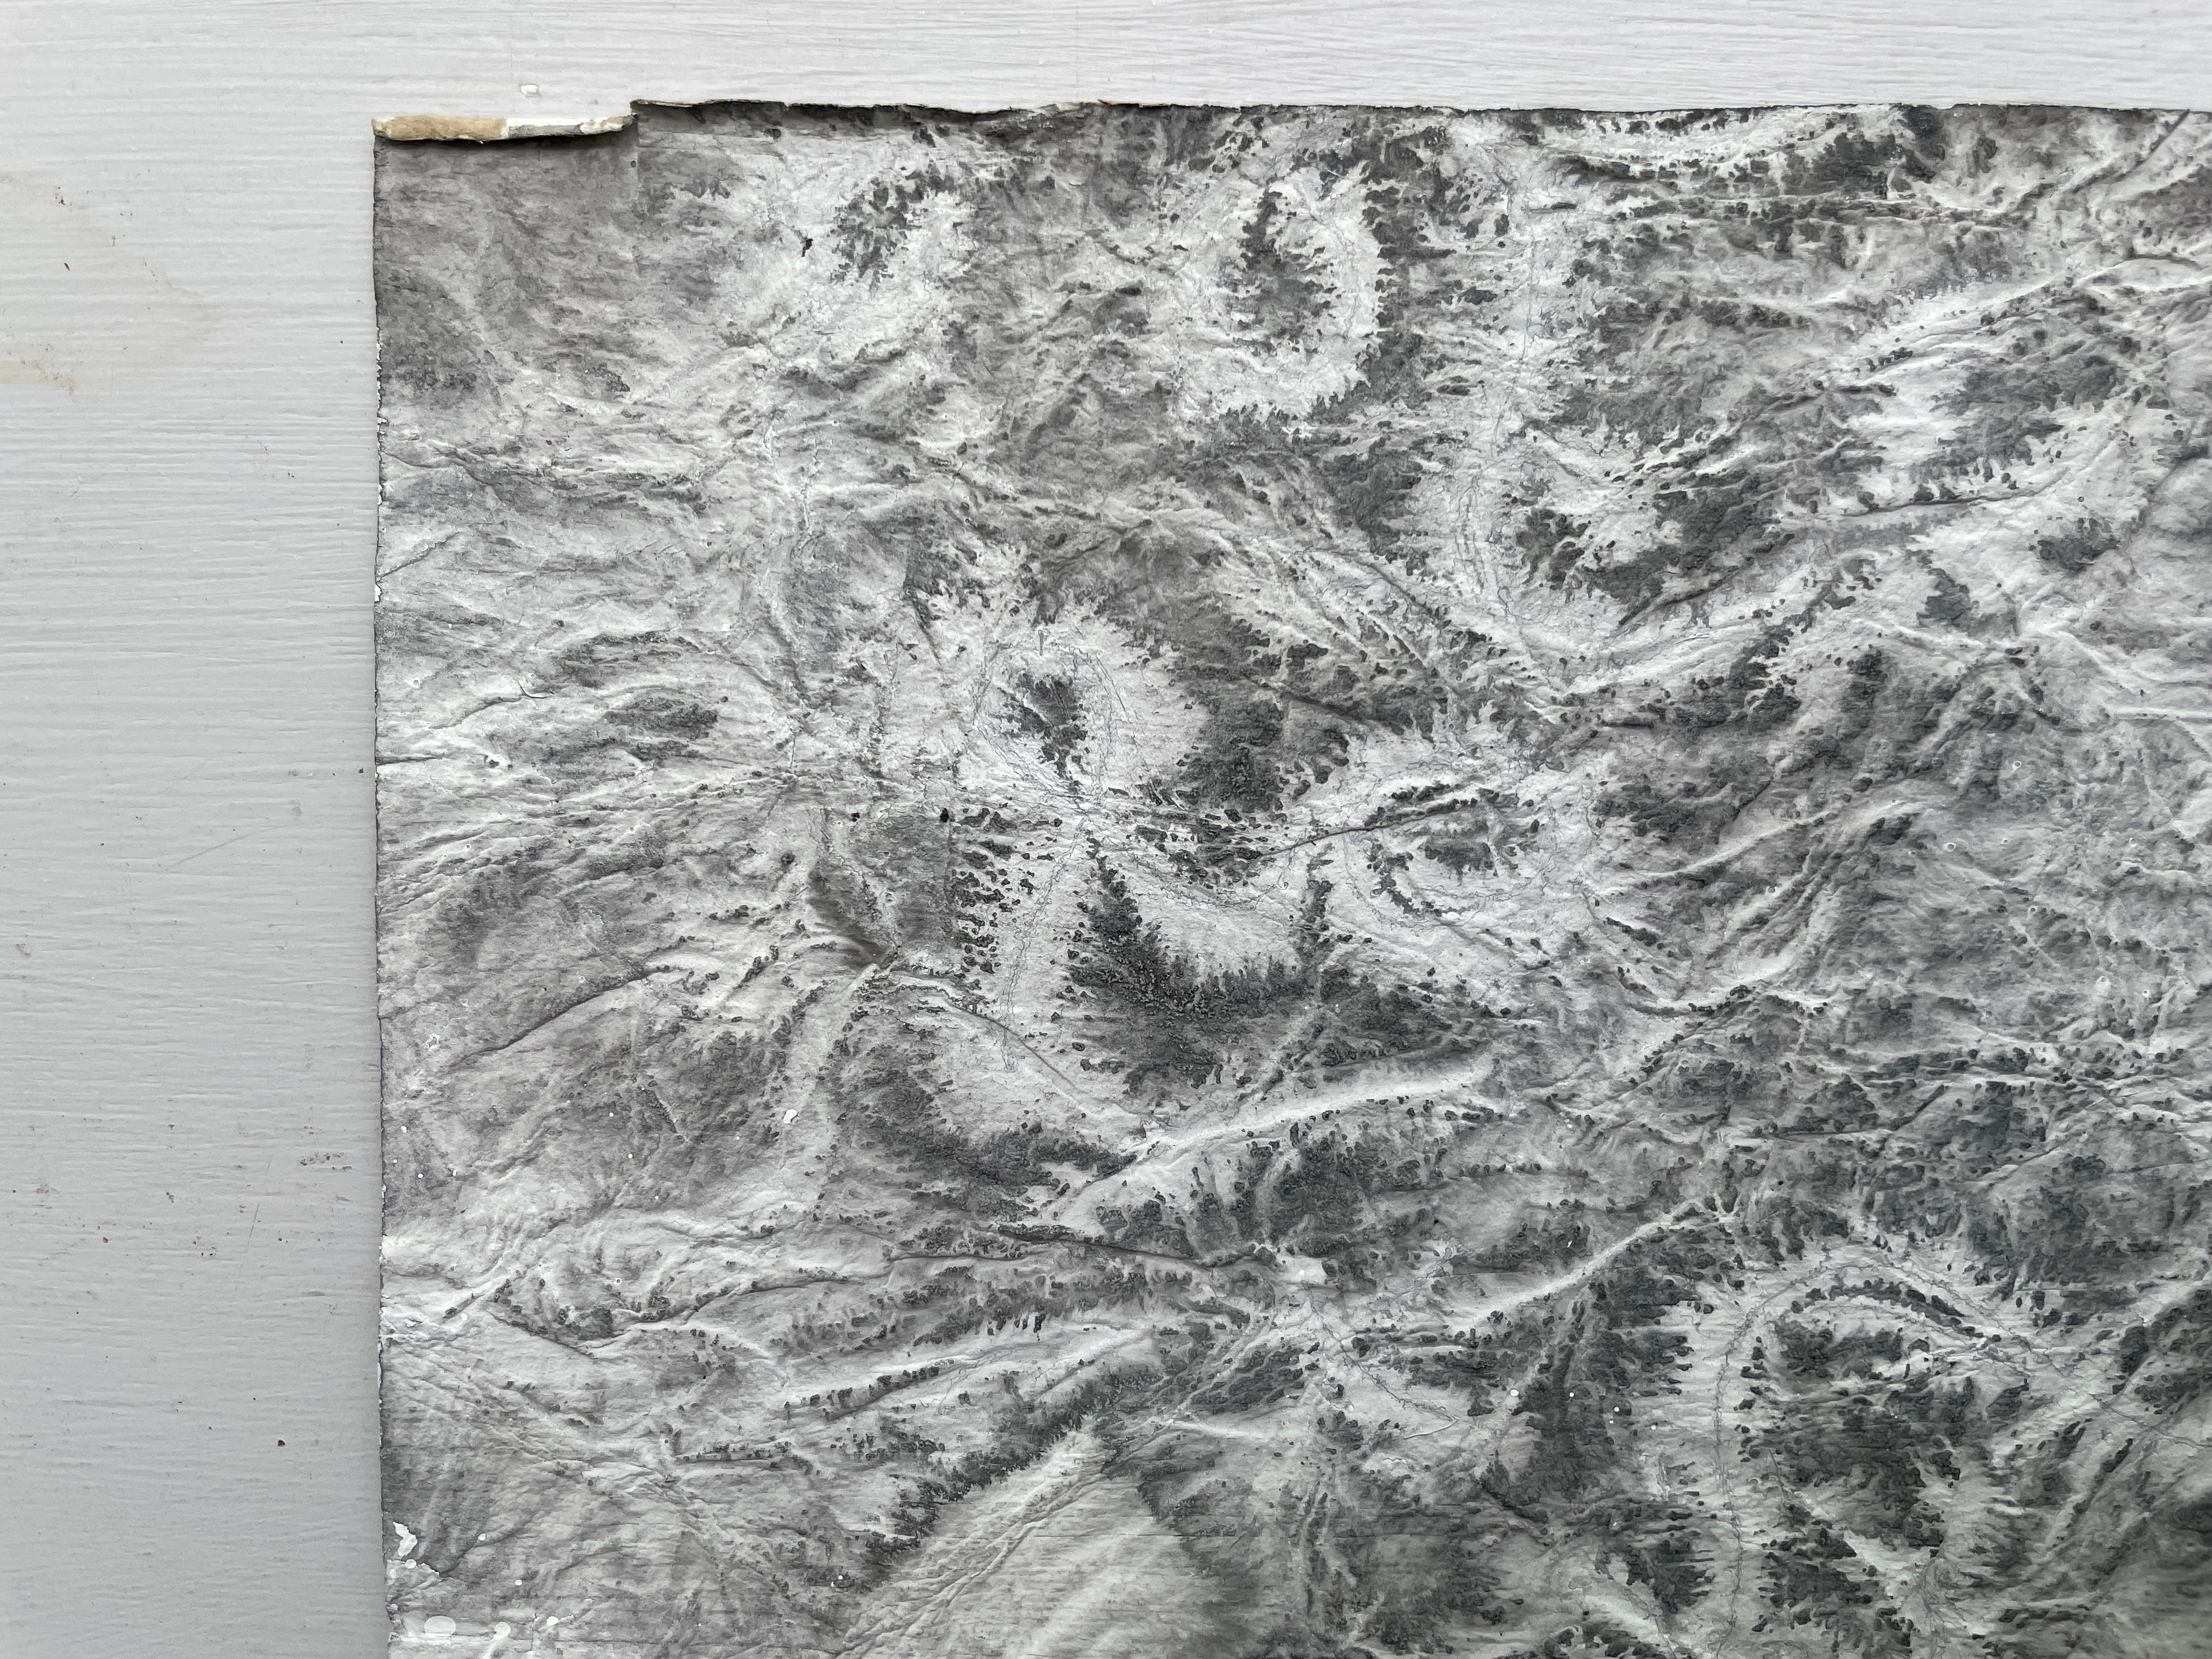 This is a sumi ink, acrylic, and mixed media painting on paper in gray, black, and white with a central white medallion. It is a highly textured work on heavy, handmade khadi paper from India, hand torn for irregular edges. This painting can be